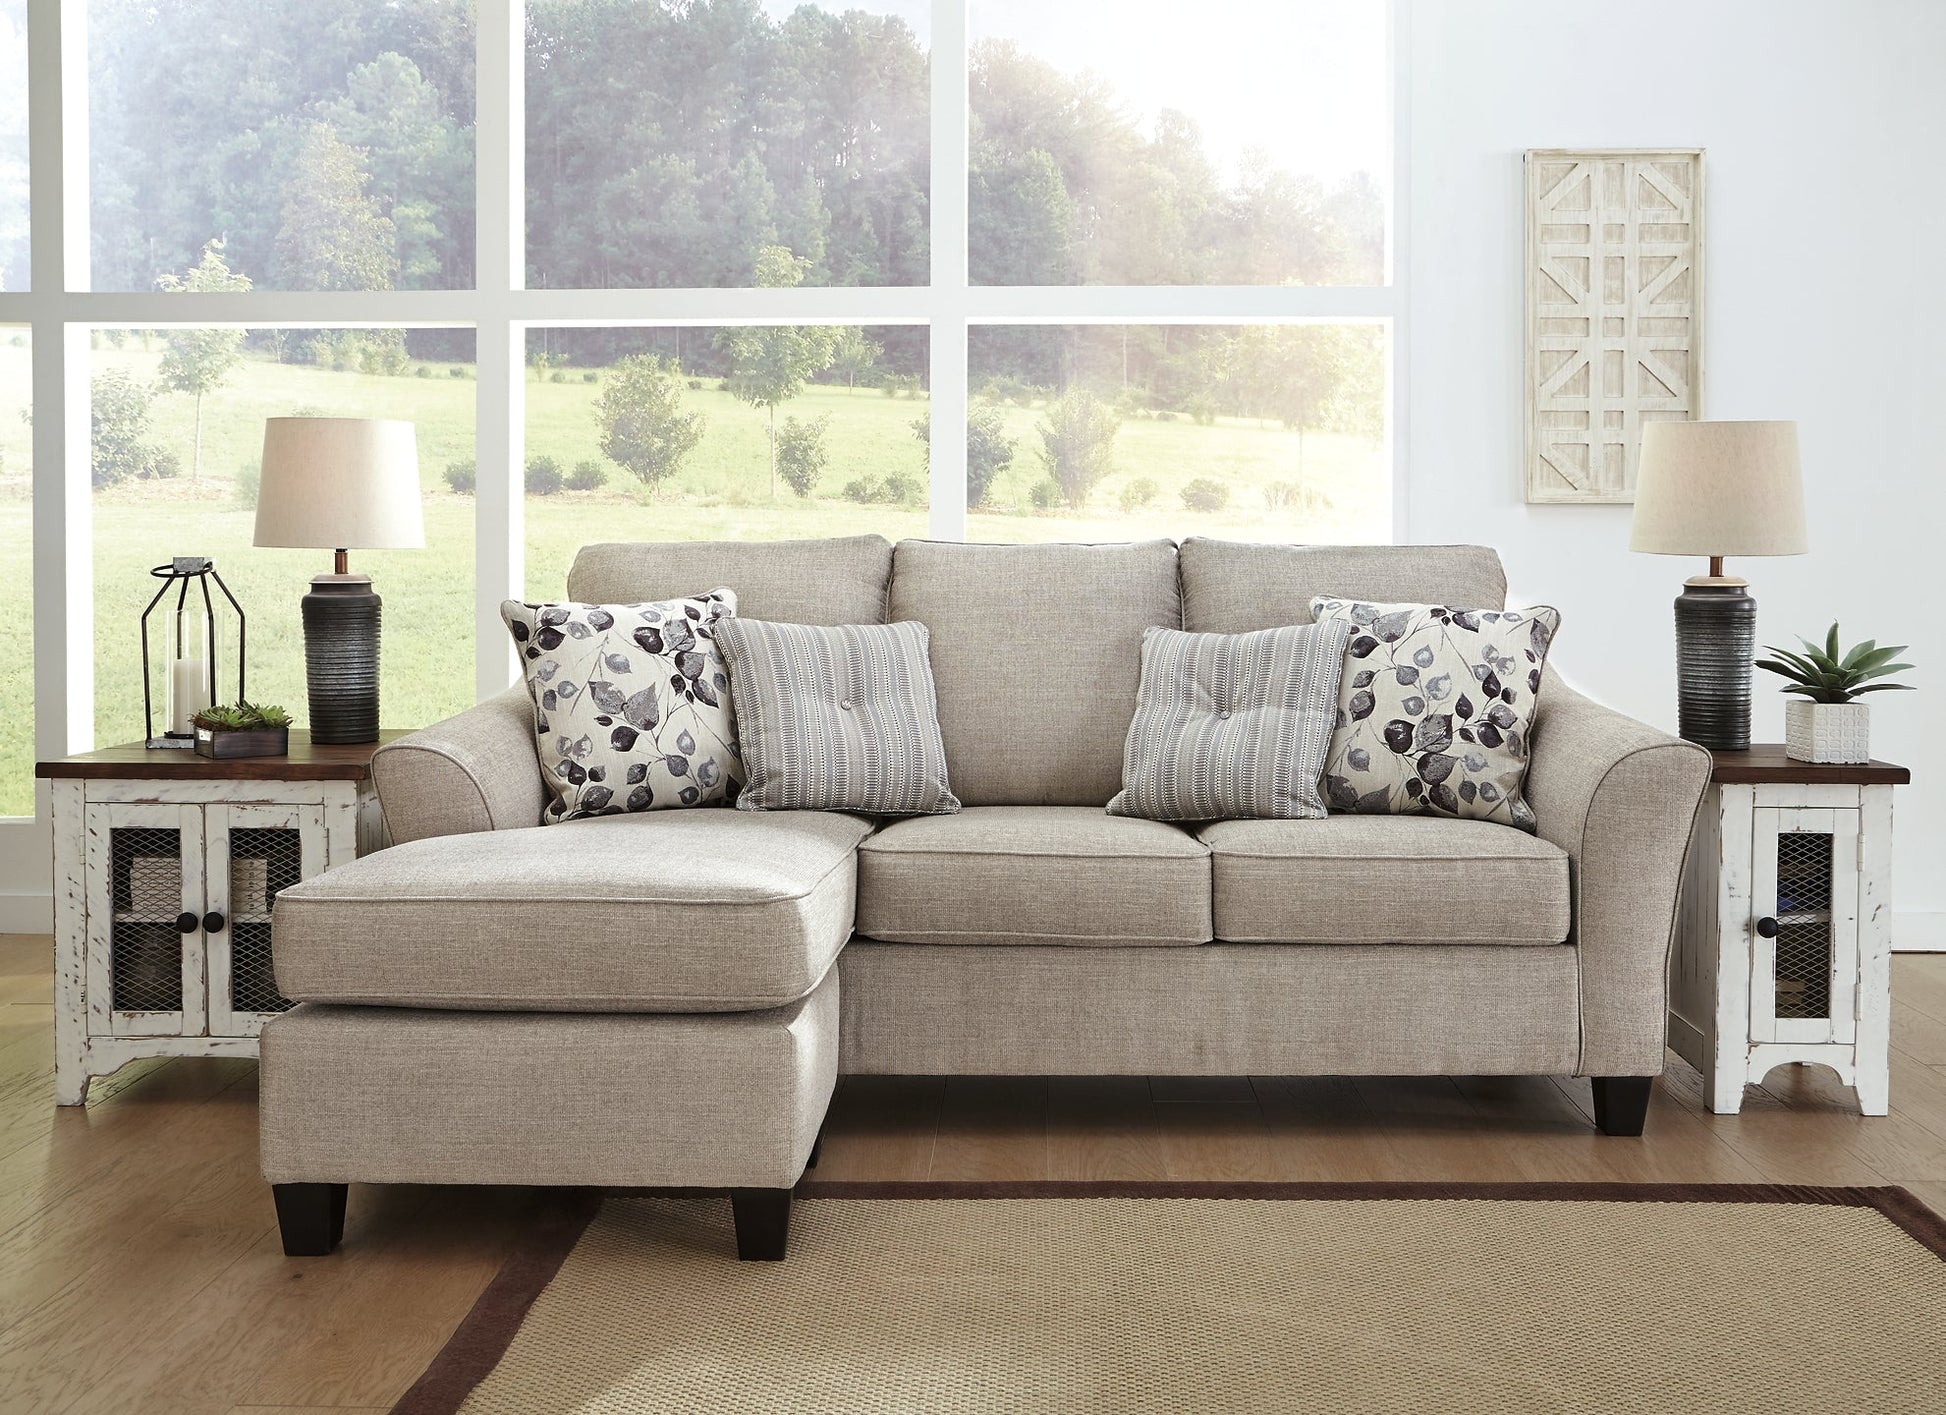 Abney Sofa Chaise Queen Sleeper Rent Wise Rent To Own Jacksonville, Florida